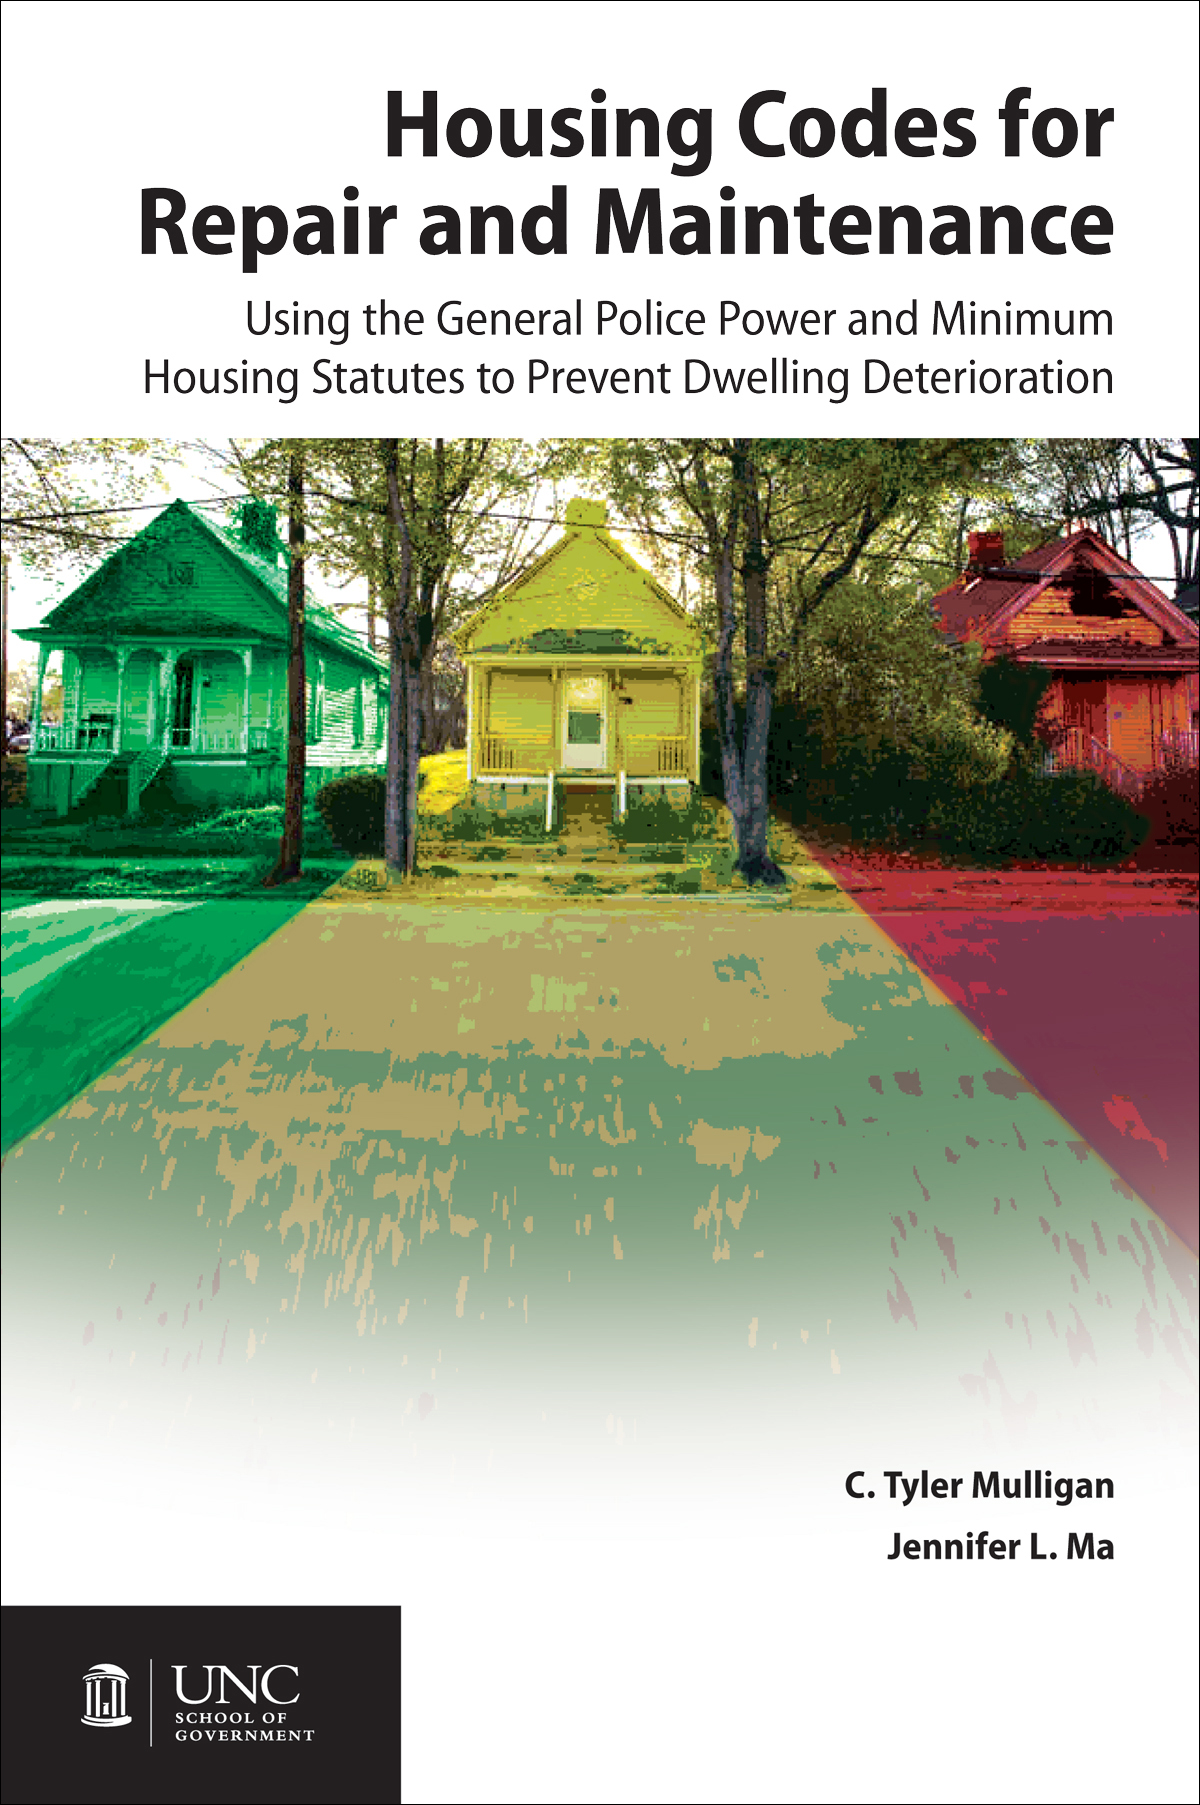 Cover image for Housing Codes for Repair and Maintenance: Using the General Police Power and Minimum Housing Statutes to Prevent Dwelling Deterioration (print format)